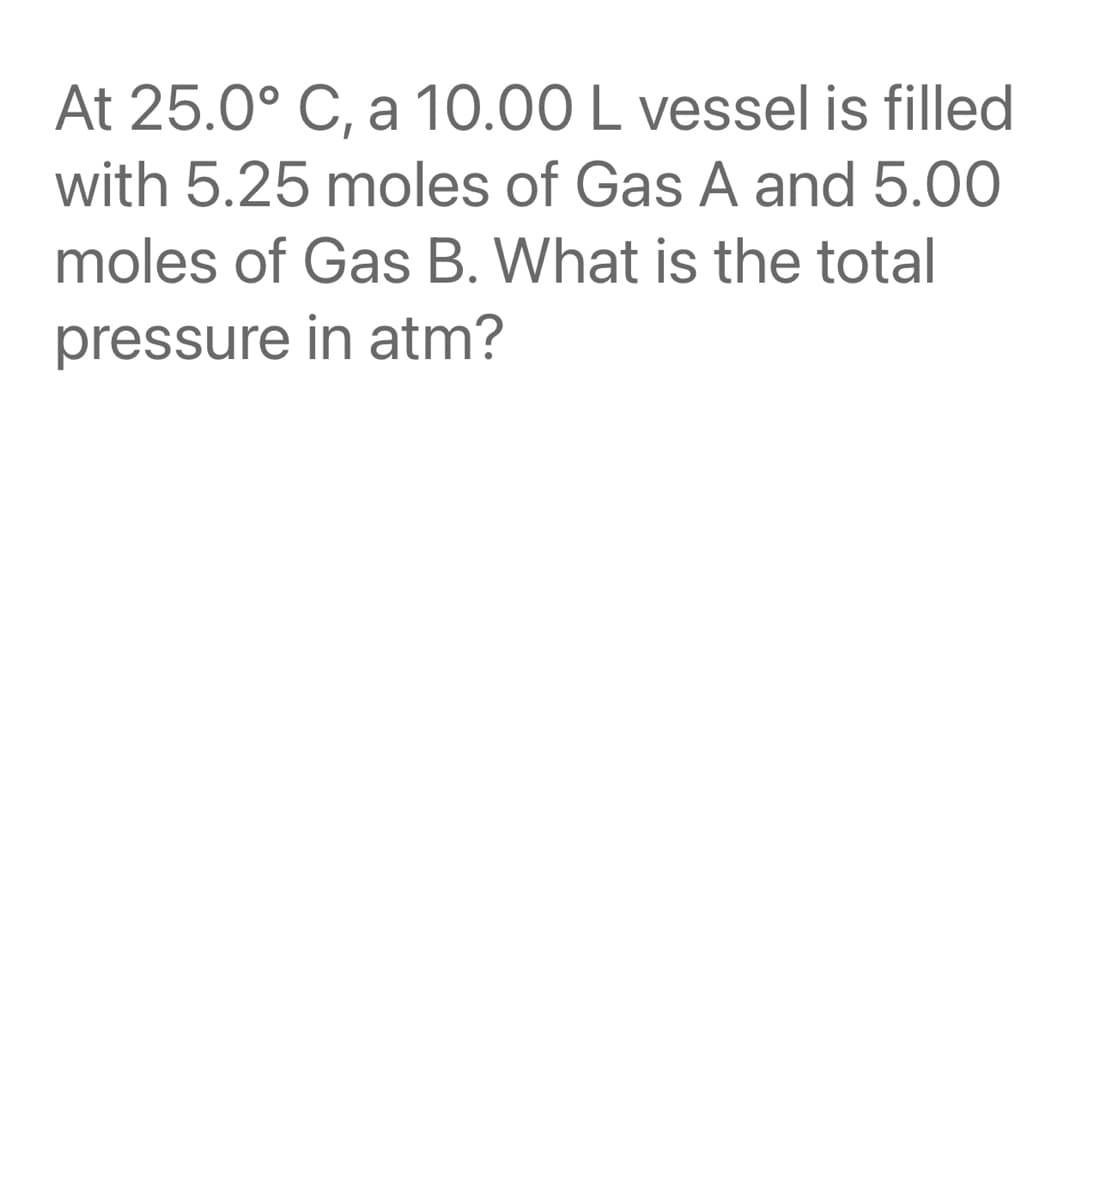 At 25.0° C, a 10.00 L vessel is filled
with 5.25 moles of Gas A and 5.00
moles of Gas B. What is the total
pressure in atm?
